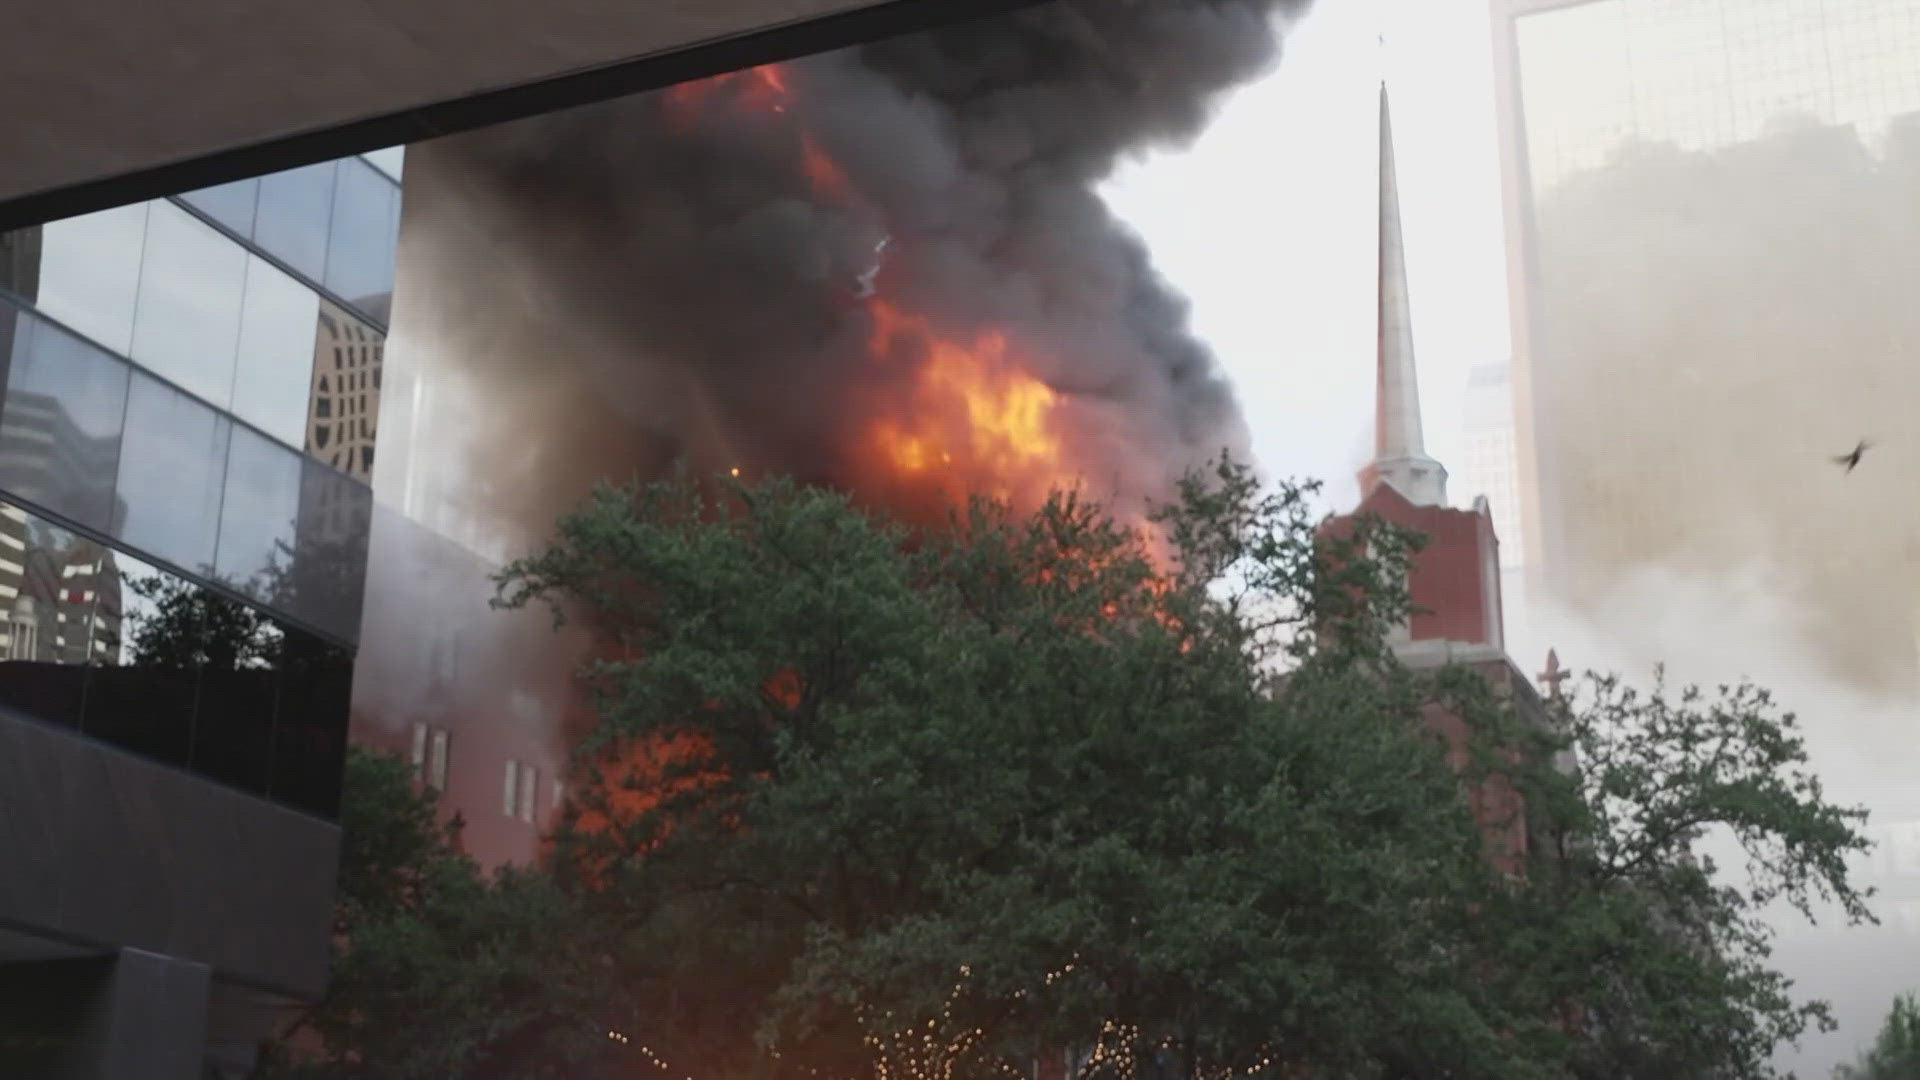 Church officials say insurance will cover the cost to rebuild.